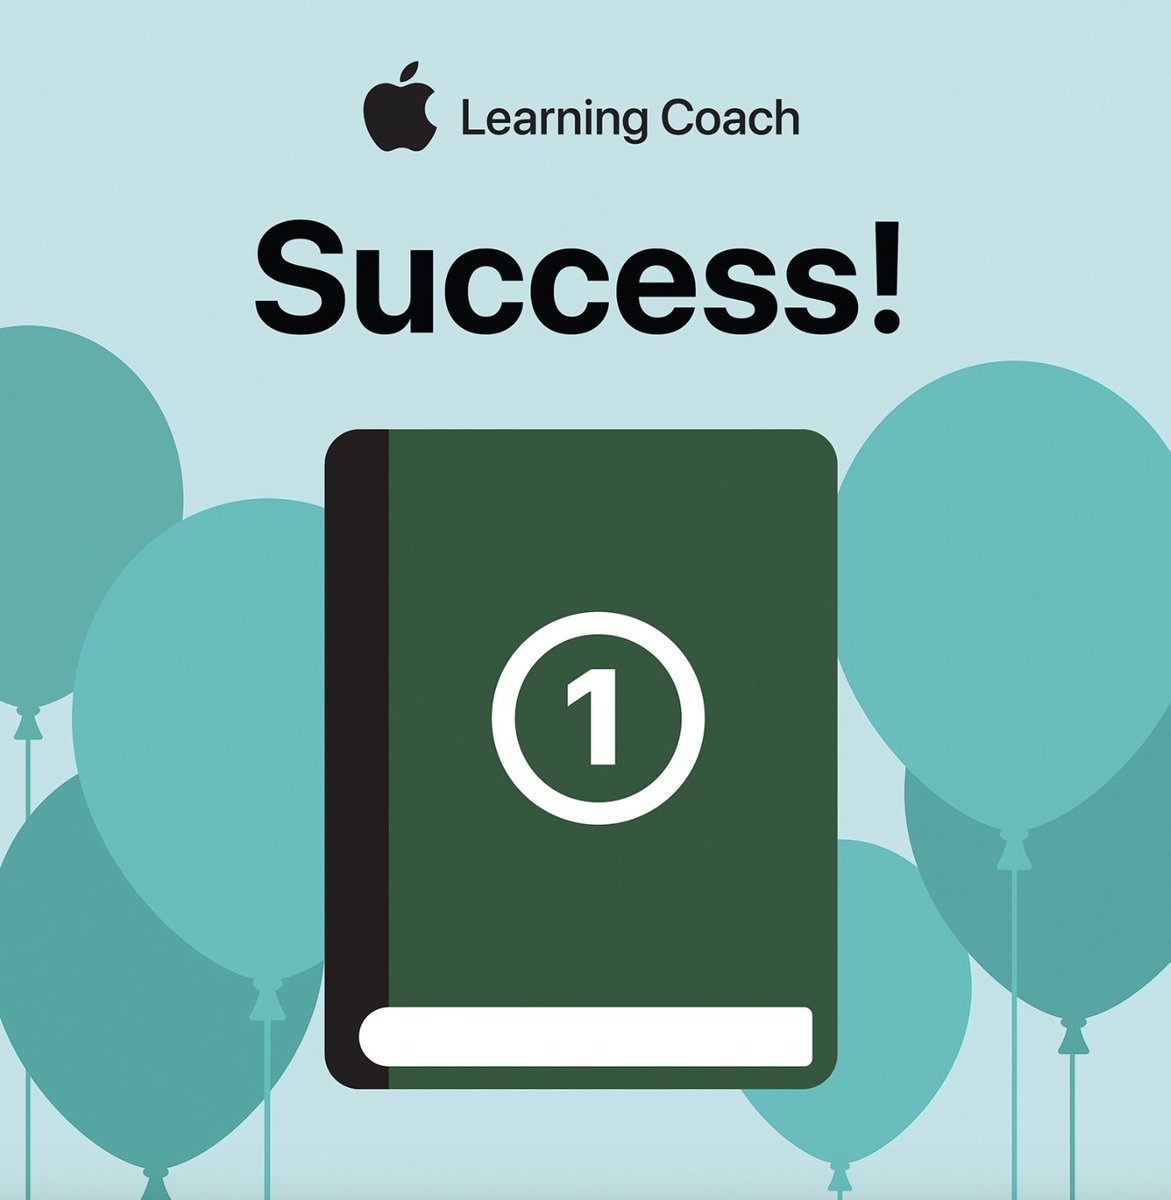 Just submitted Unit 1 of my Apple Learning Coach Portfolio! Woohoo! 🎉 @techtheville   @AppleEDU #AppleLearningCoach